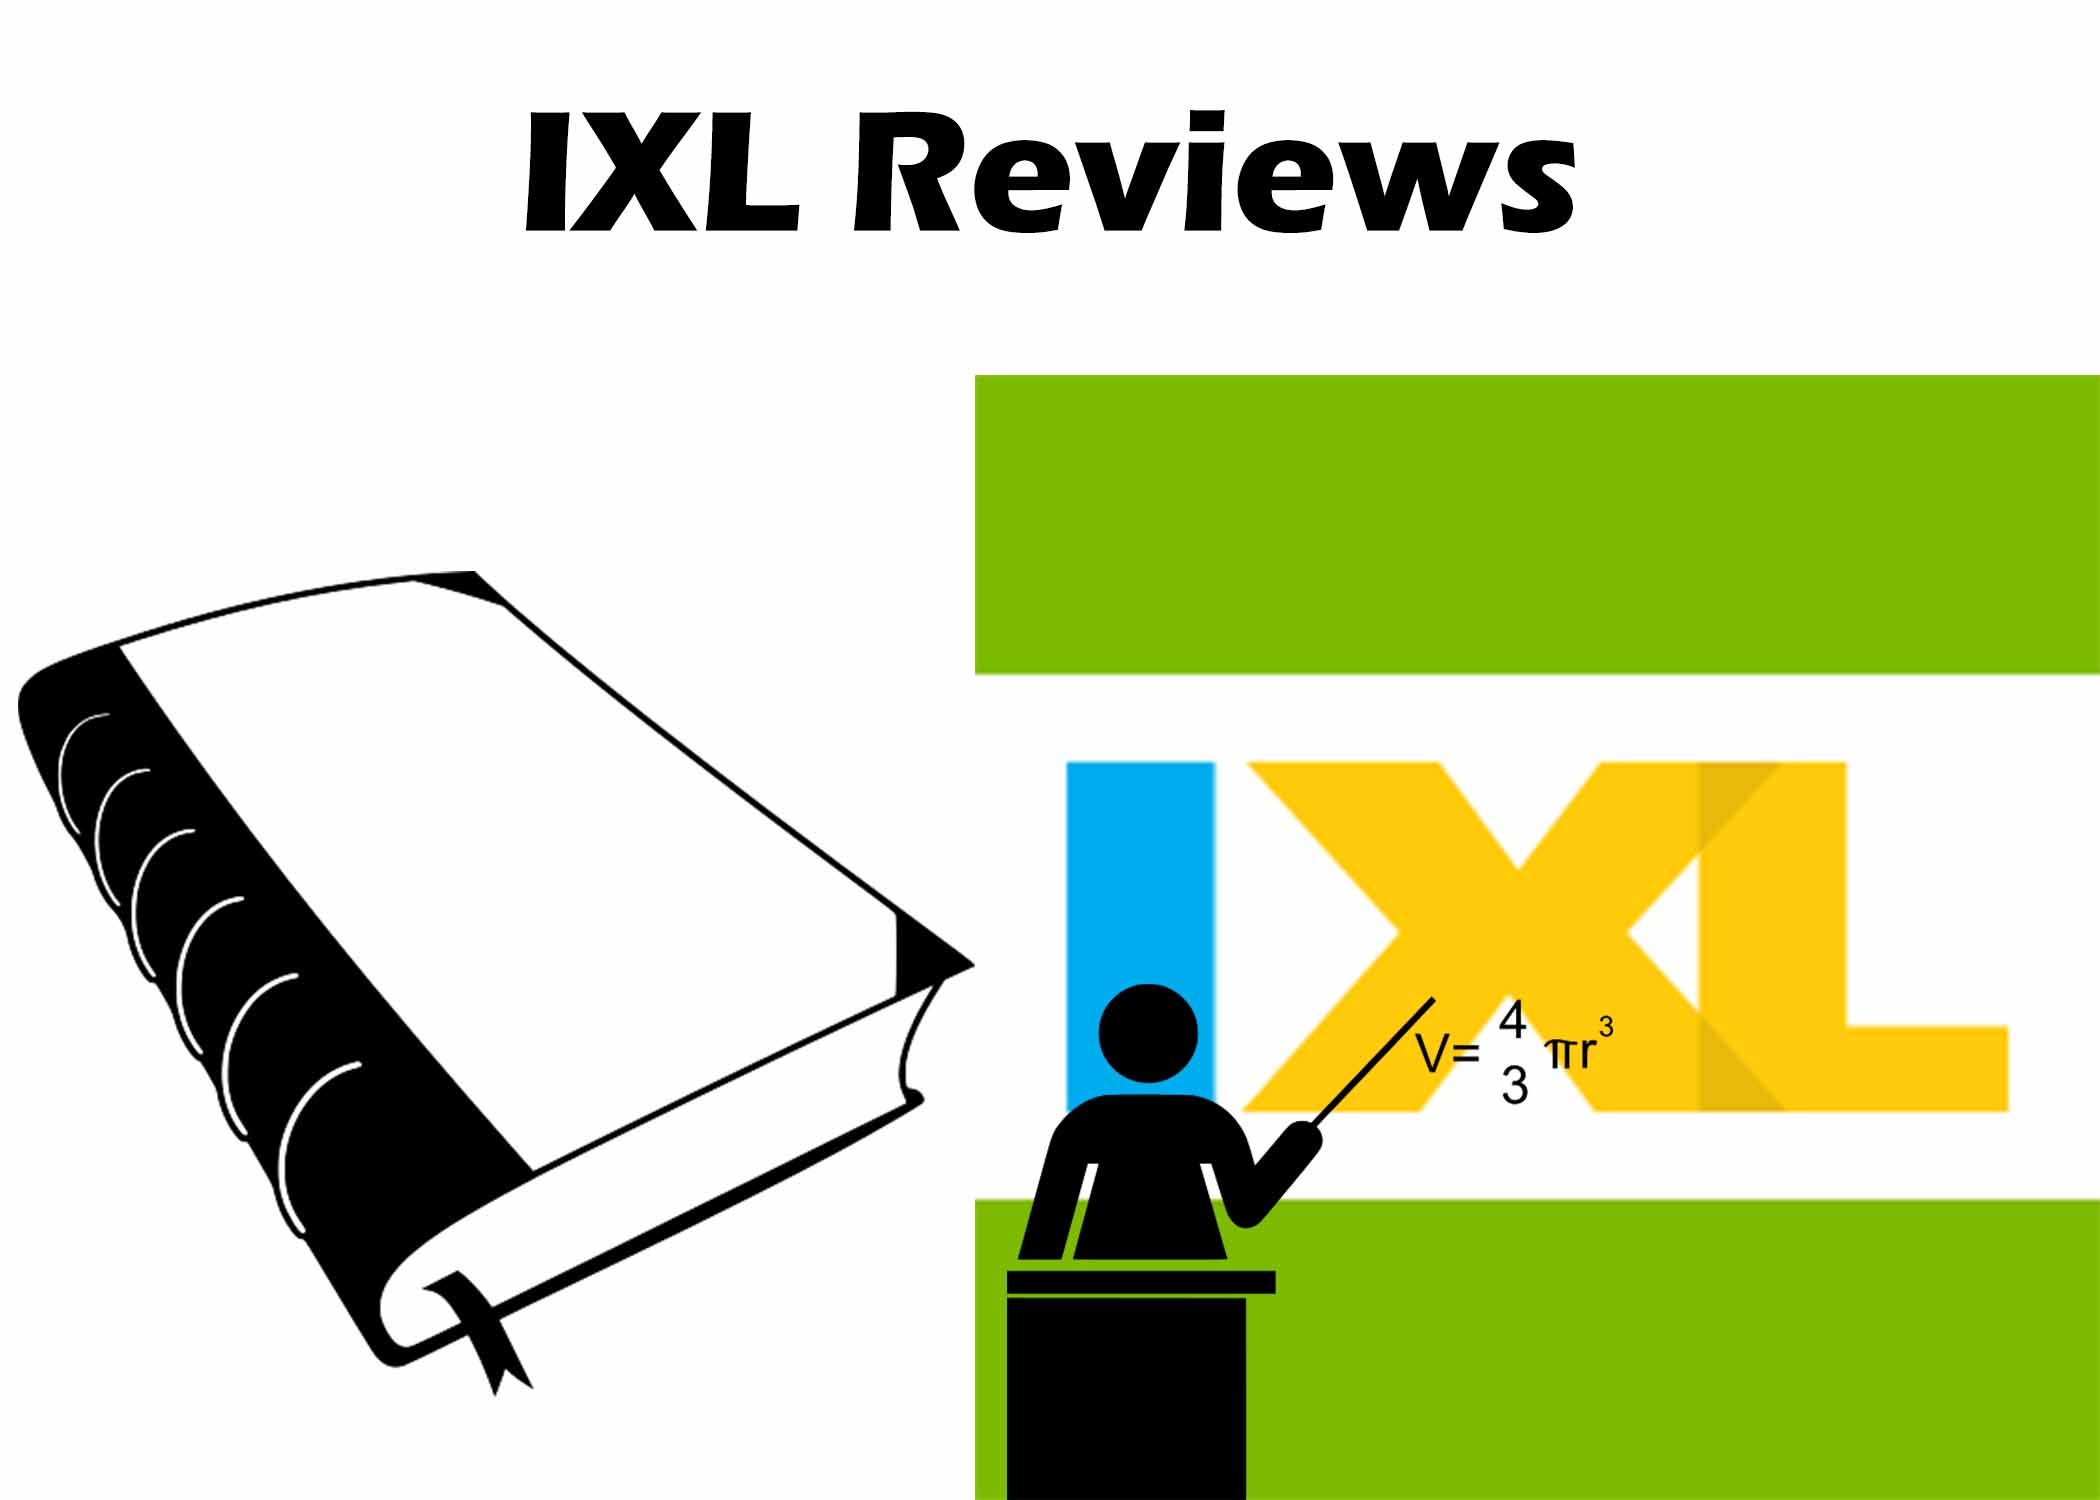 IXL Reviews - Is It the Right Learning Platform for Your Child?